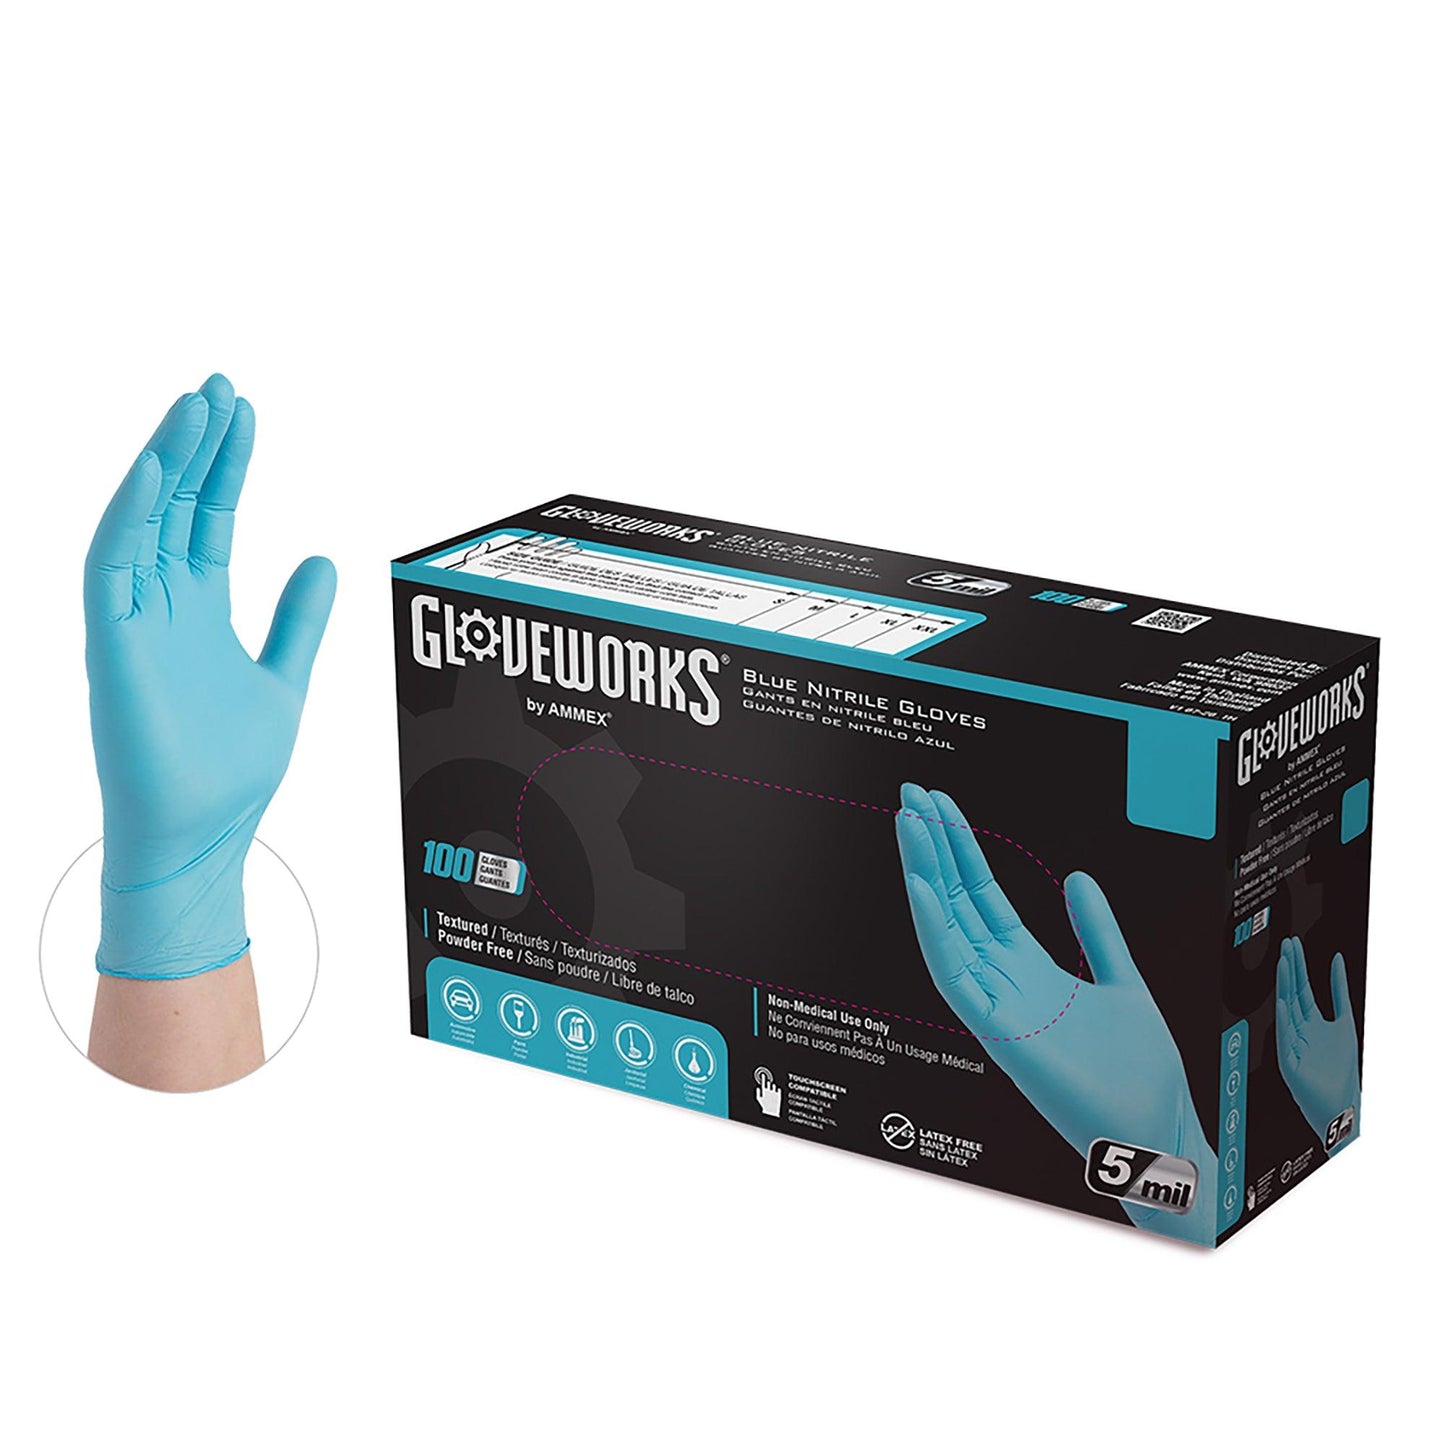 AMMEX Gloveworks Blue Nitrile Industrial Latex Free Disposable Gloves (Case of 1000) - Cetrix Technologies LLC